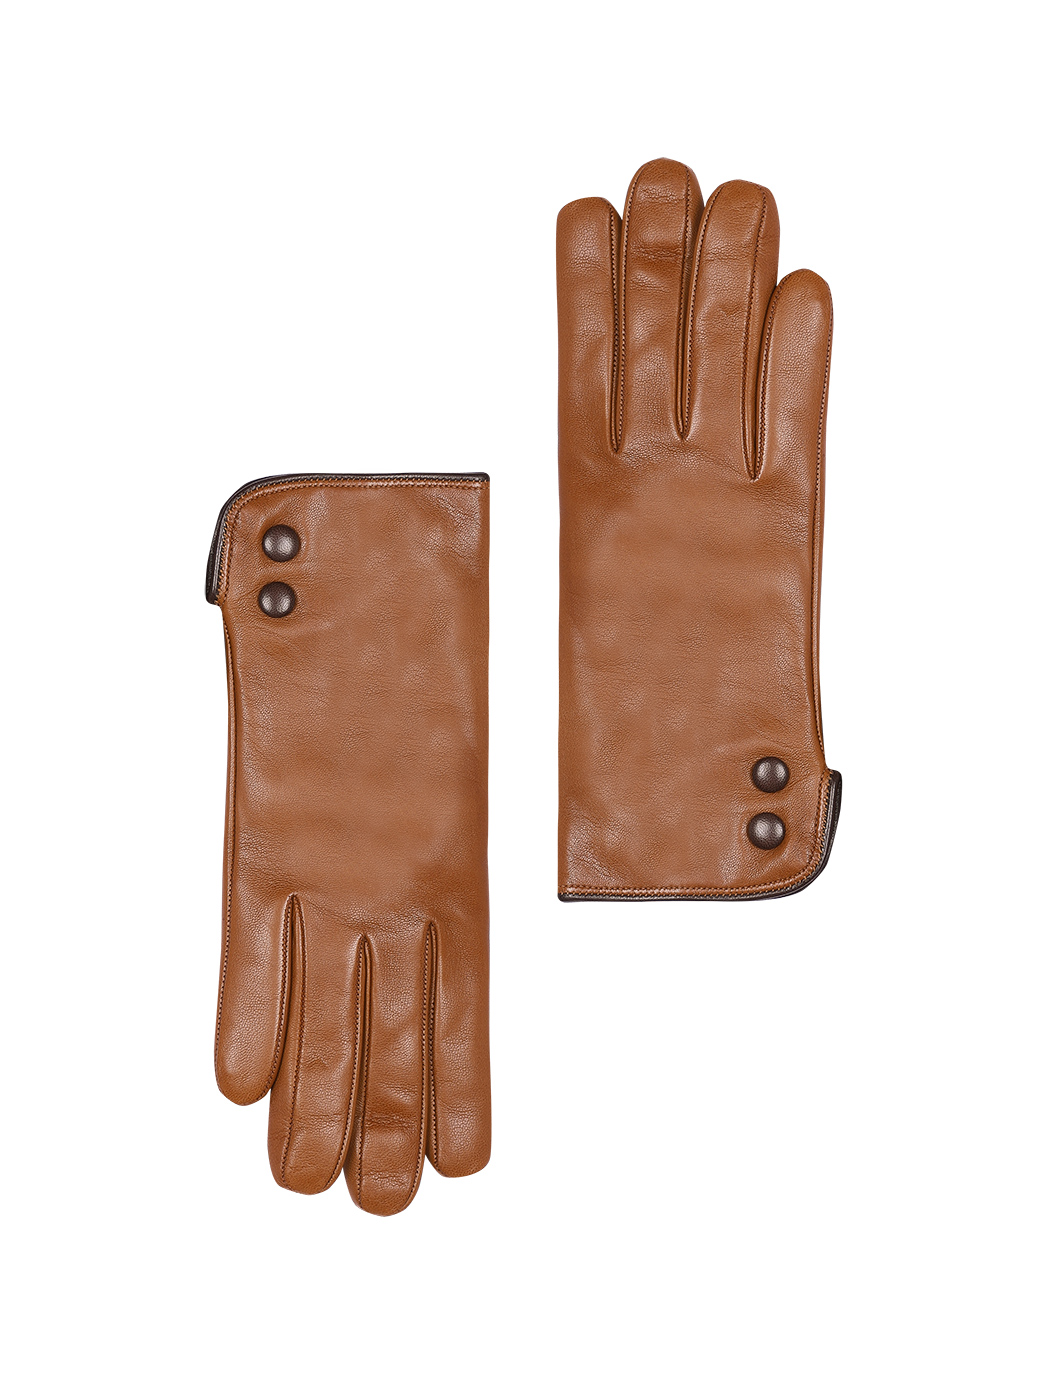 Women's Cashmere Lined Gloves in Leather